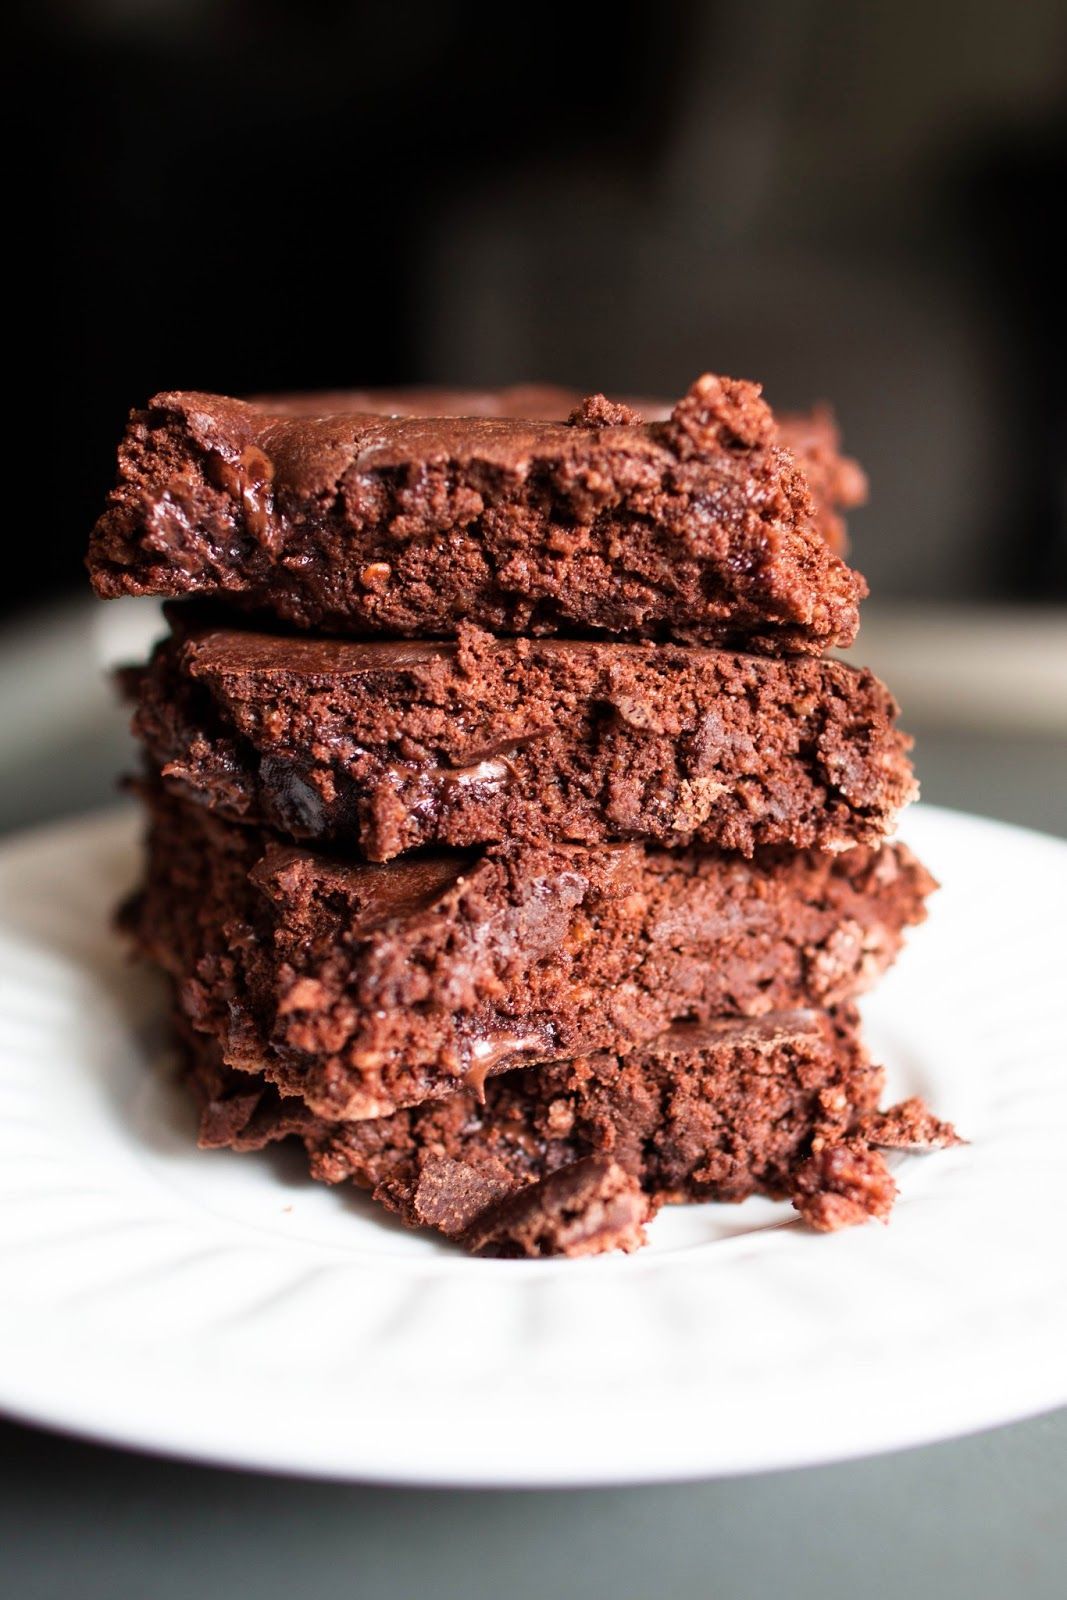 37 calorie brownies 3/4 cup nonfat greek yogurt 1/4 cup skim milk 1/2 cup Cocoa powder 1/2 cup Old fashioned rolled oats (like